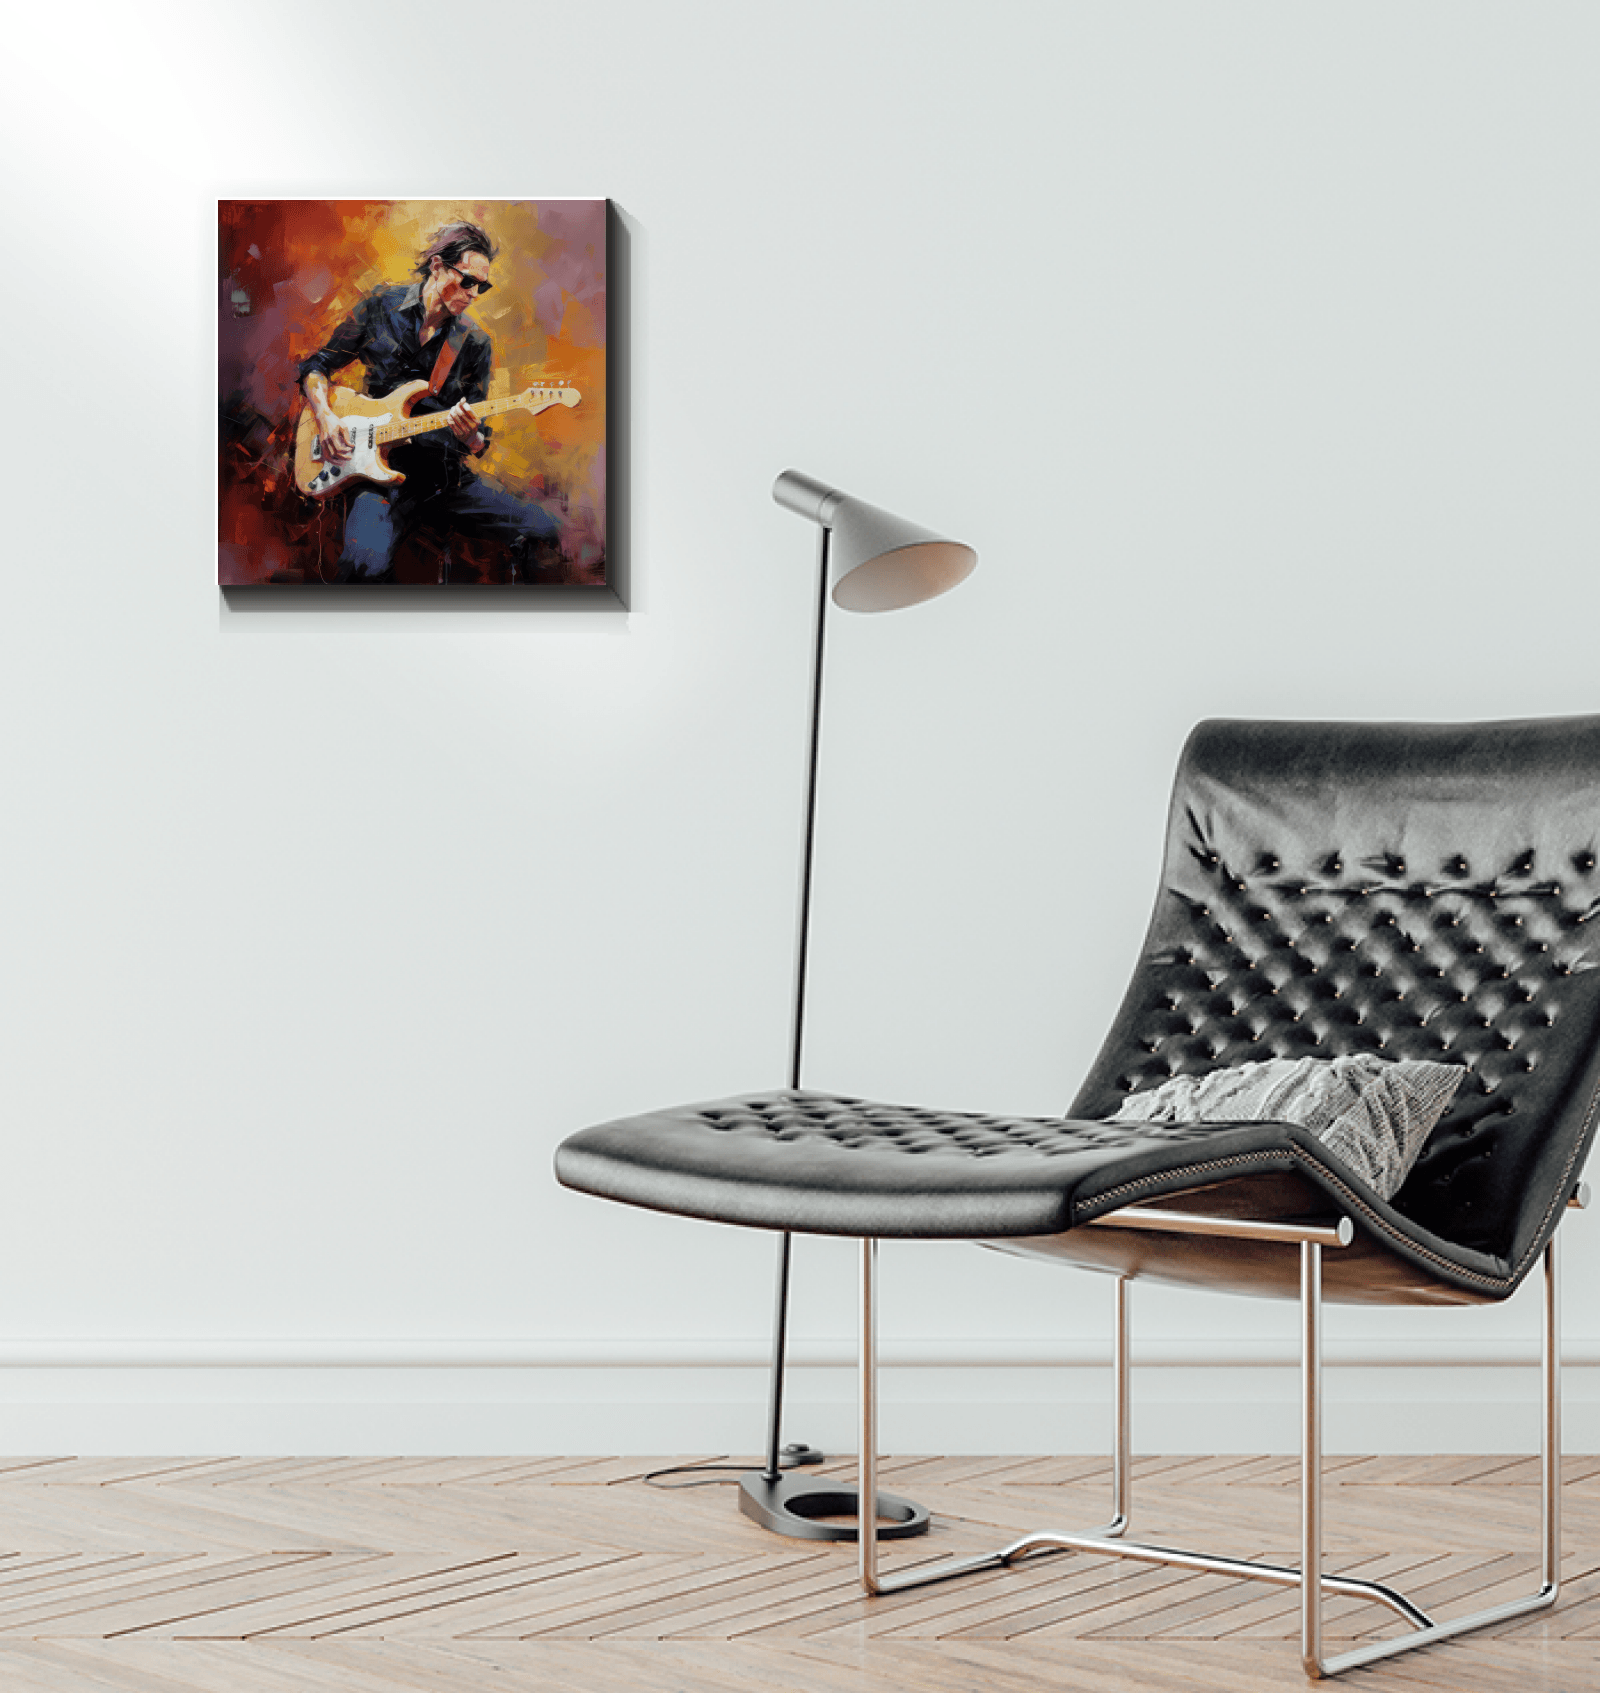 Guitar-themed wrapped canvas for music enthusiasts